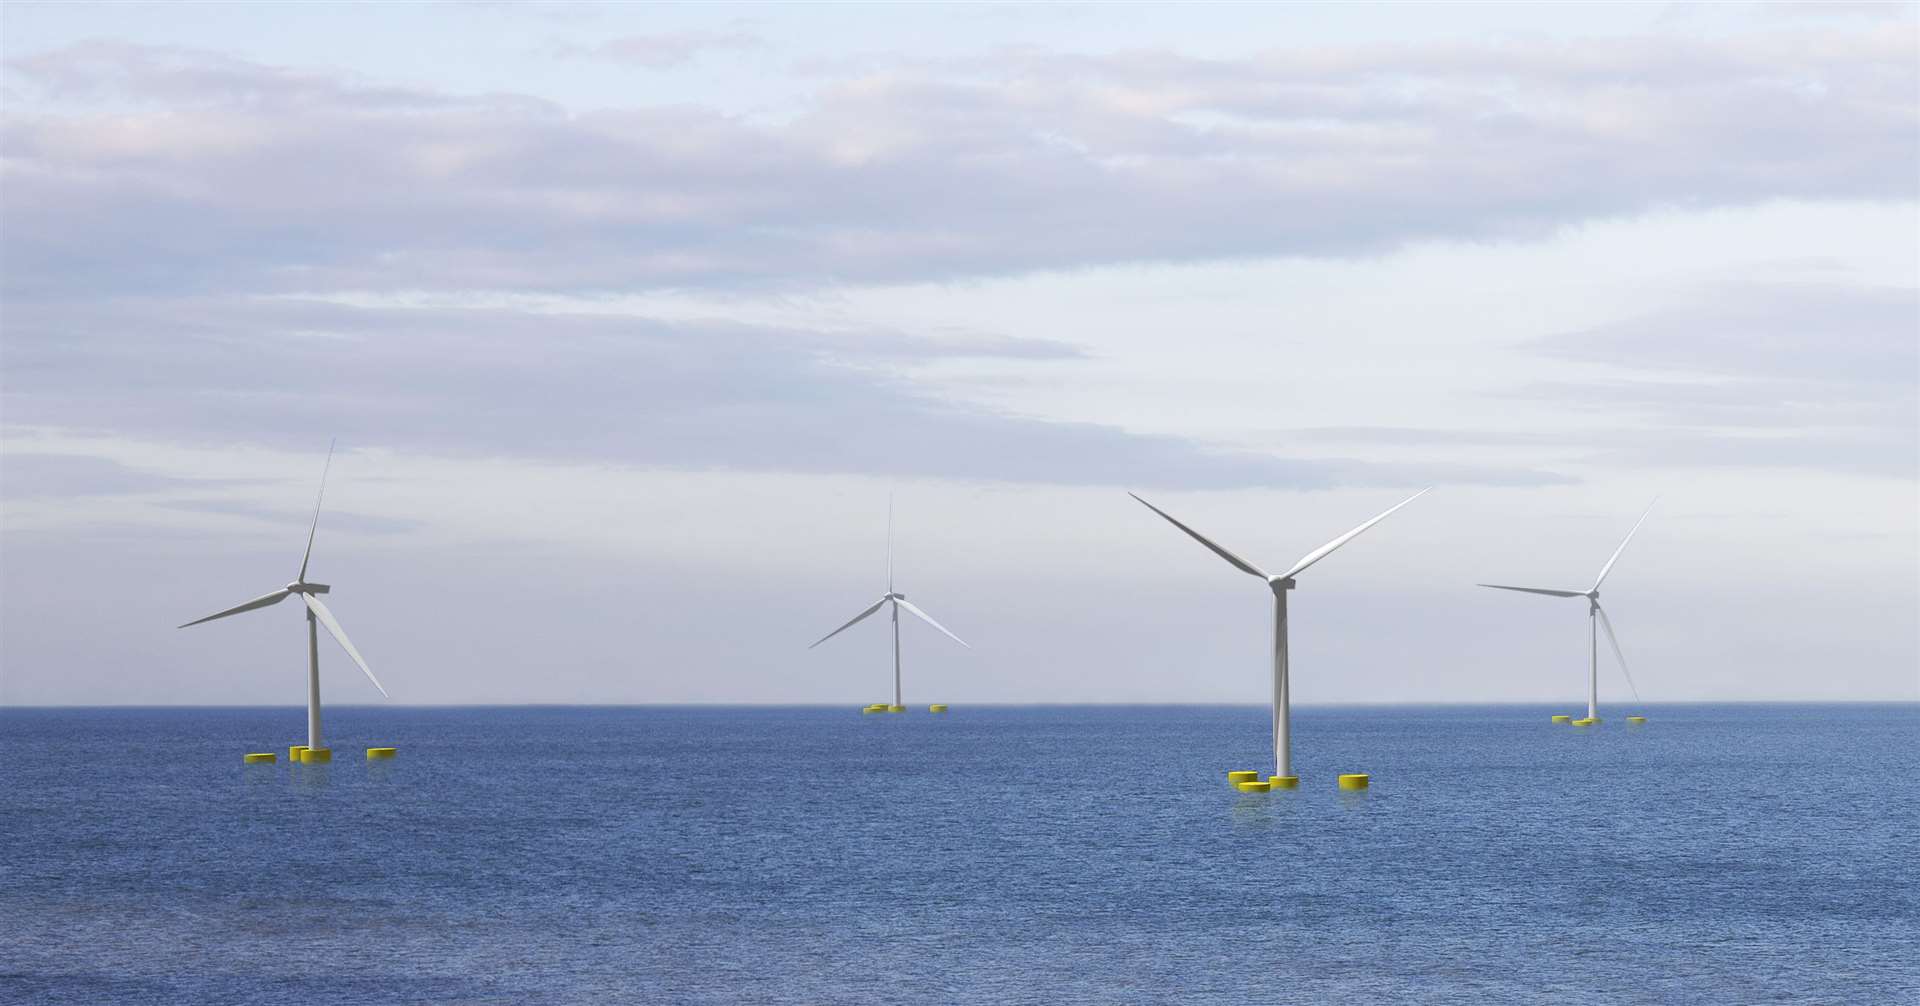 The proposed Pentland Floating Offshore Wind Farm will be located around 6.5 kilometres off Dounreay.